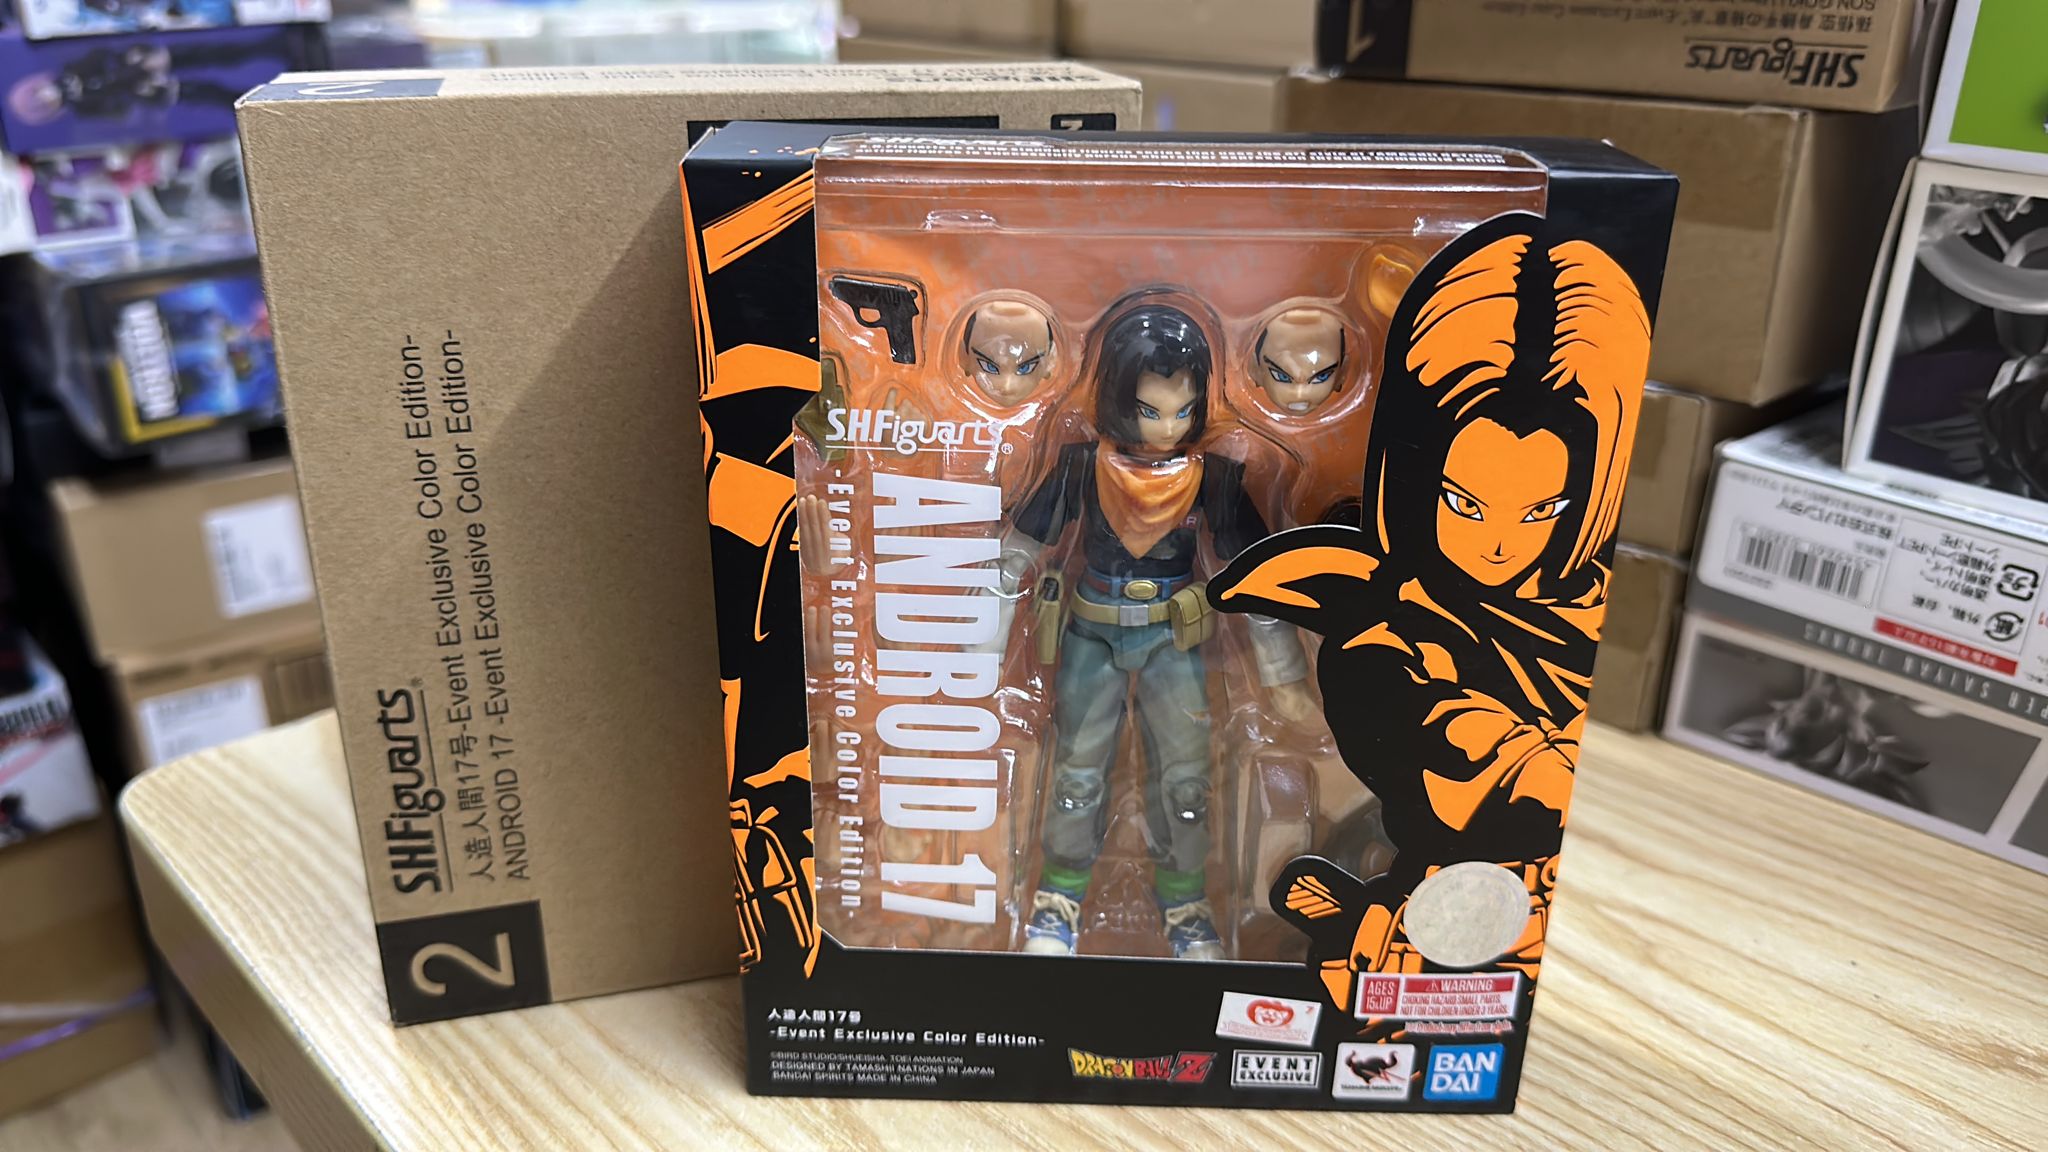 Bandai S.H. Figuarts Dragon Ball Z Android 17 Event Exclusive Color Edition  